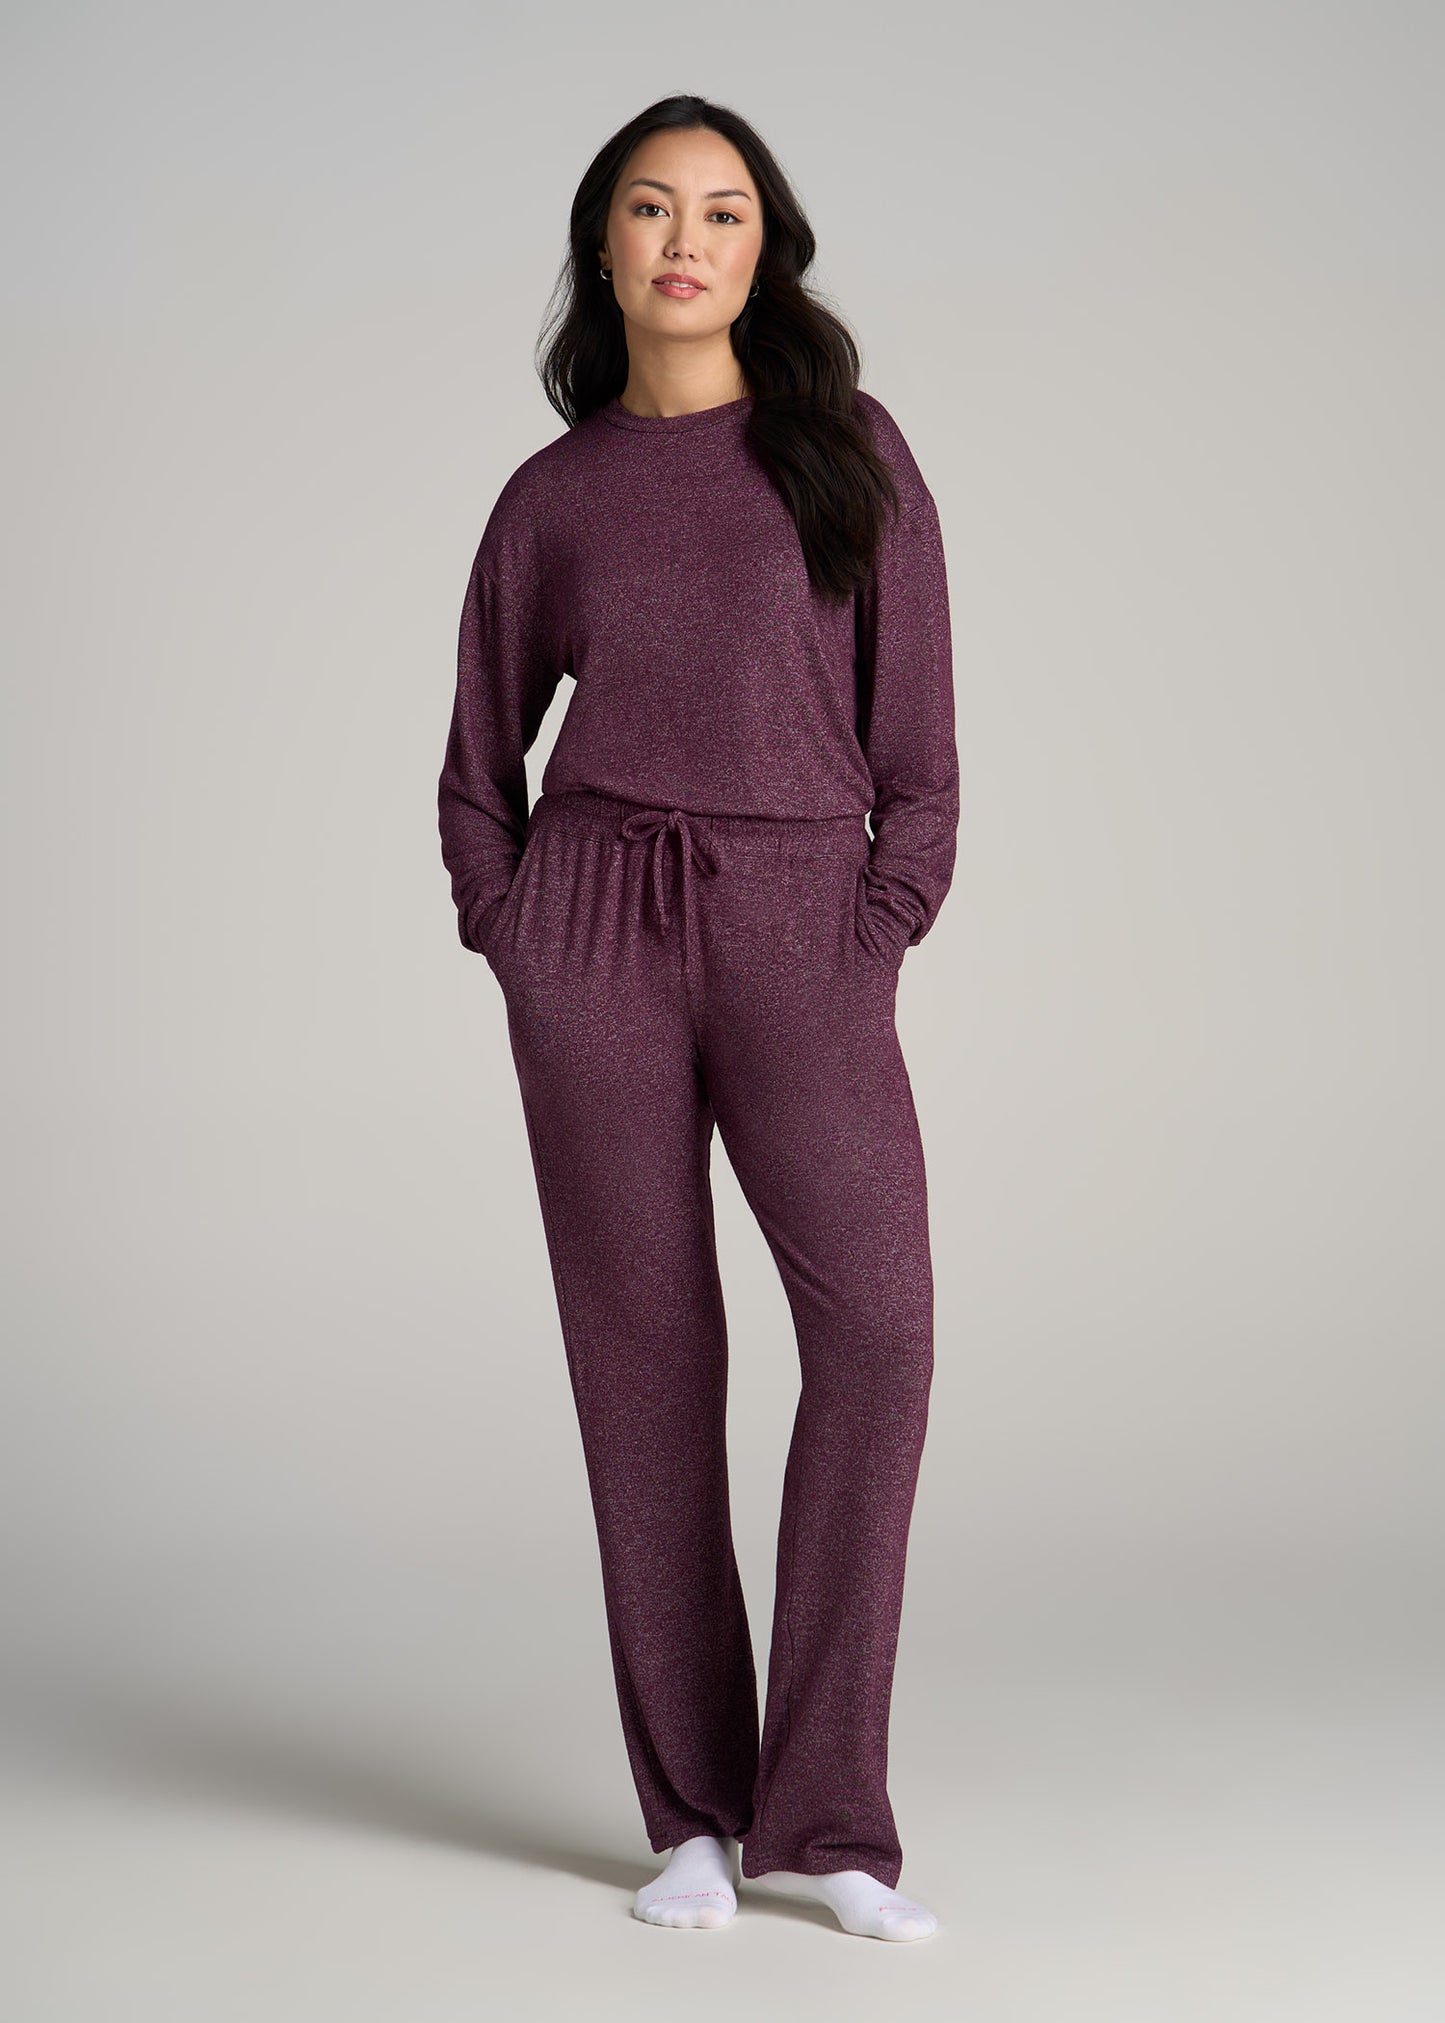 Cozy Lounge Crewneck in Beetroot Mix - Tall Women's Shirts